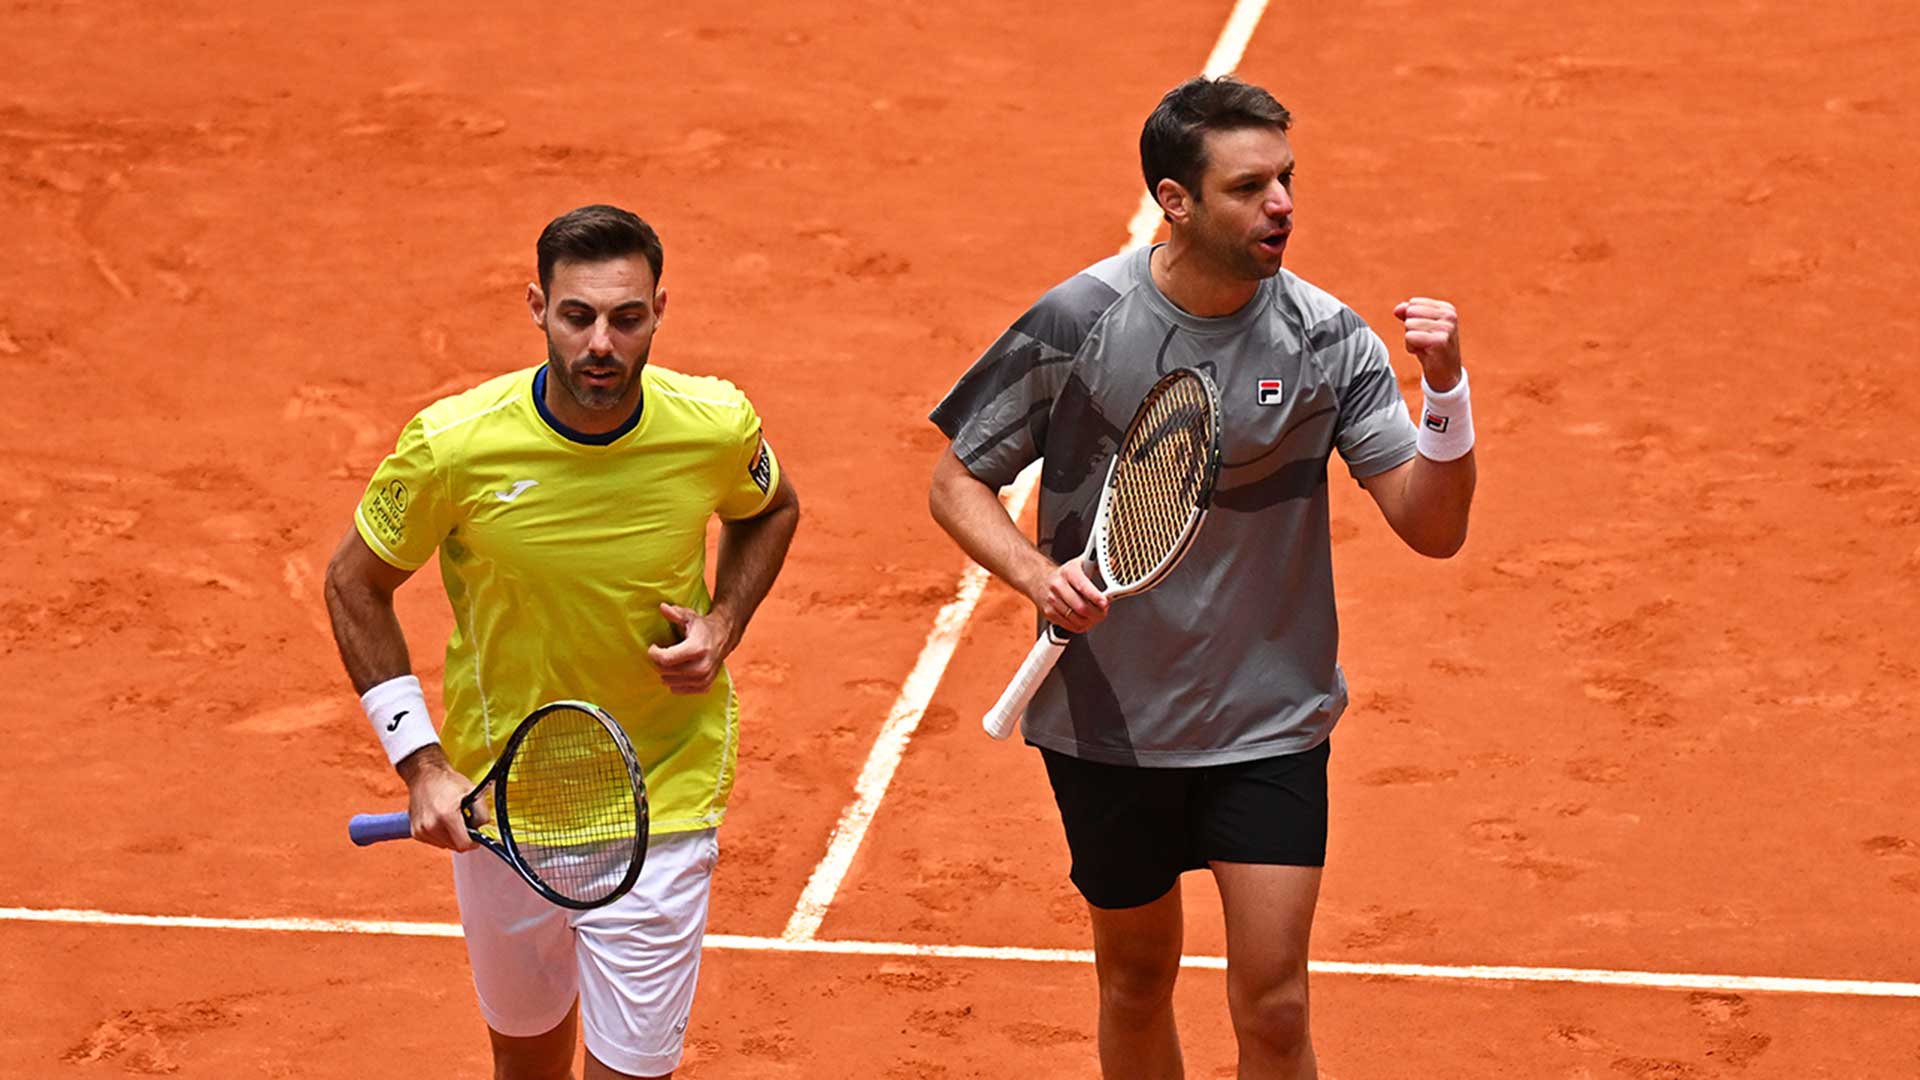 Top seeds Granollers/Zeballos start Rome campaign